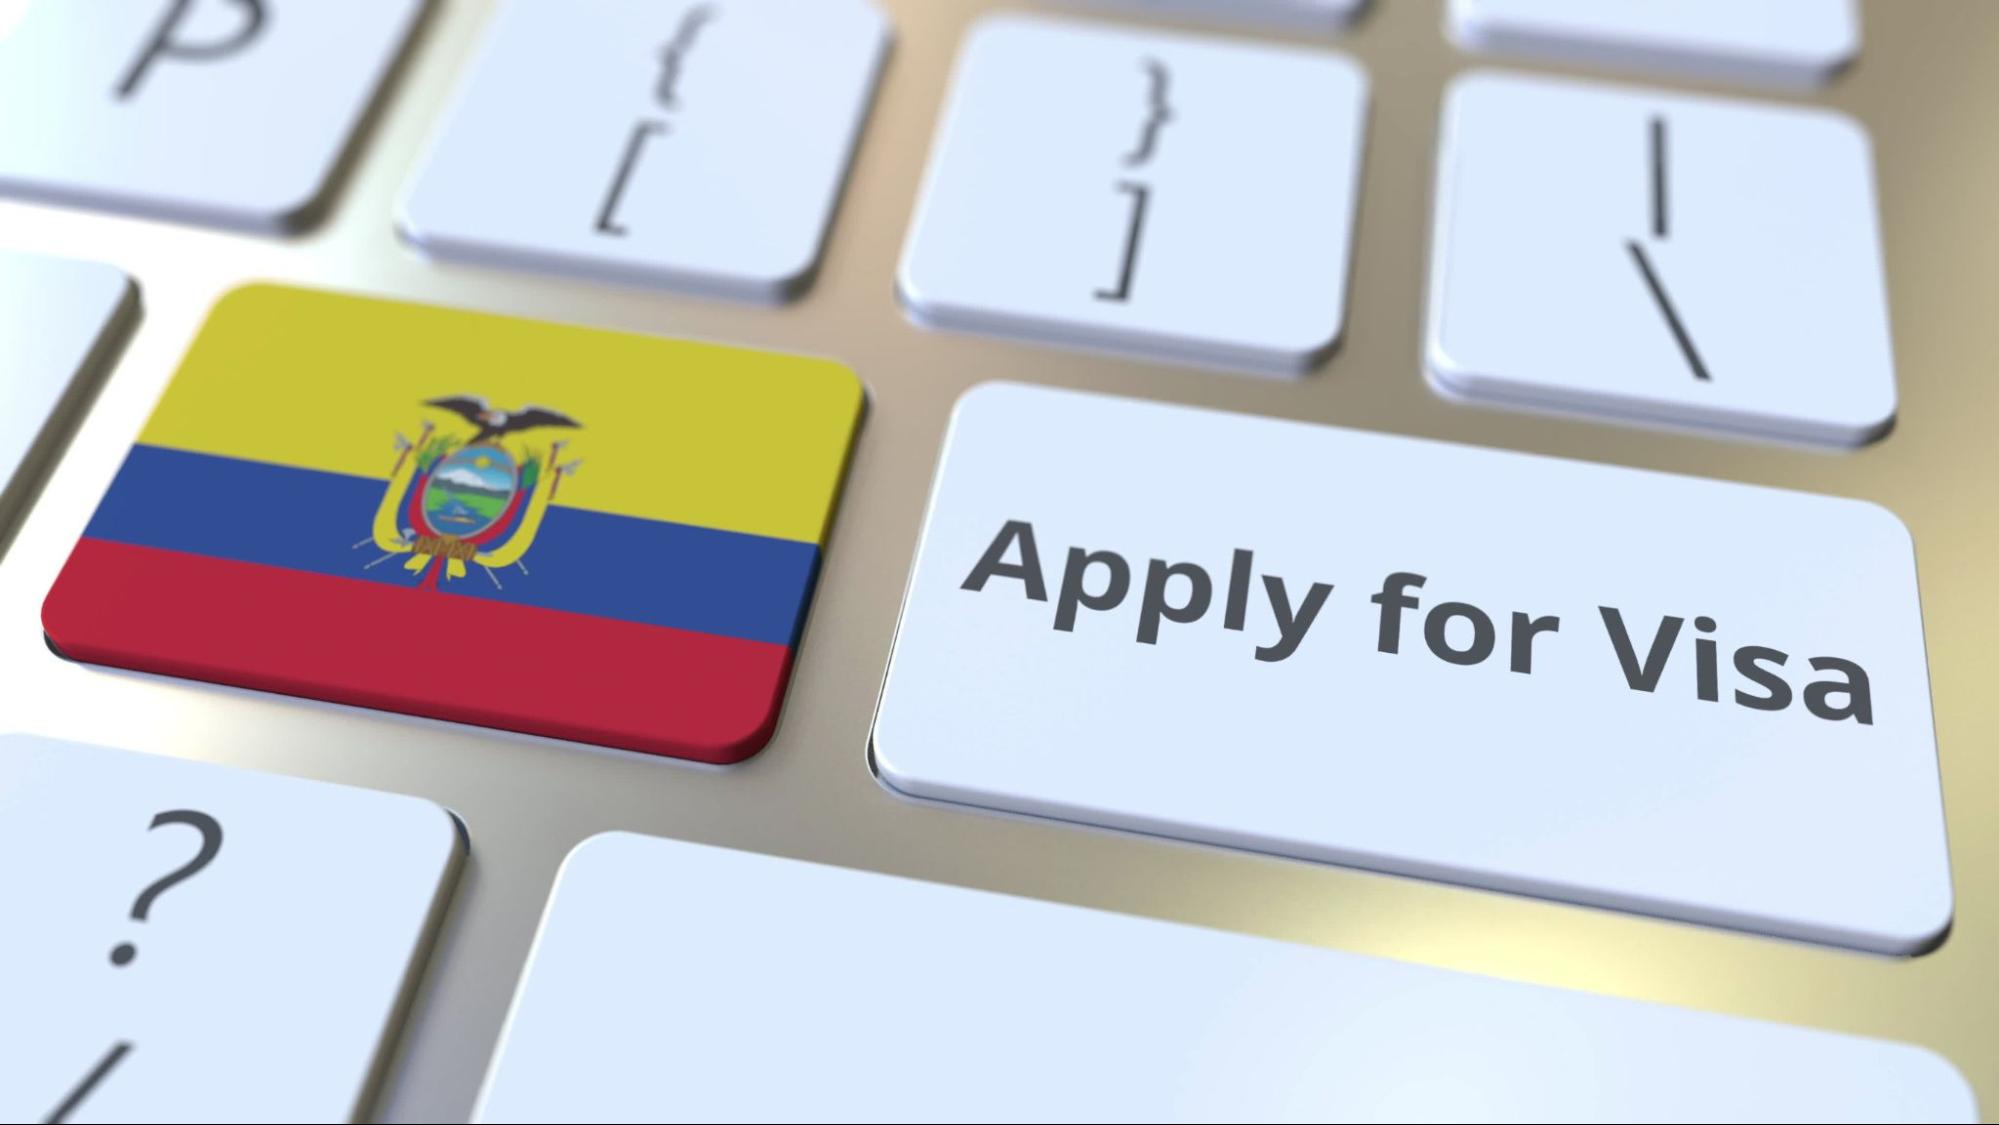 APPLY FOR VISA text and flag of Ecuador on the buttons on the computer keyboard